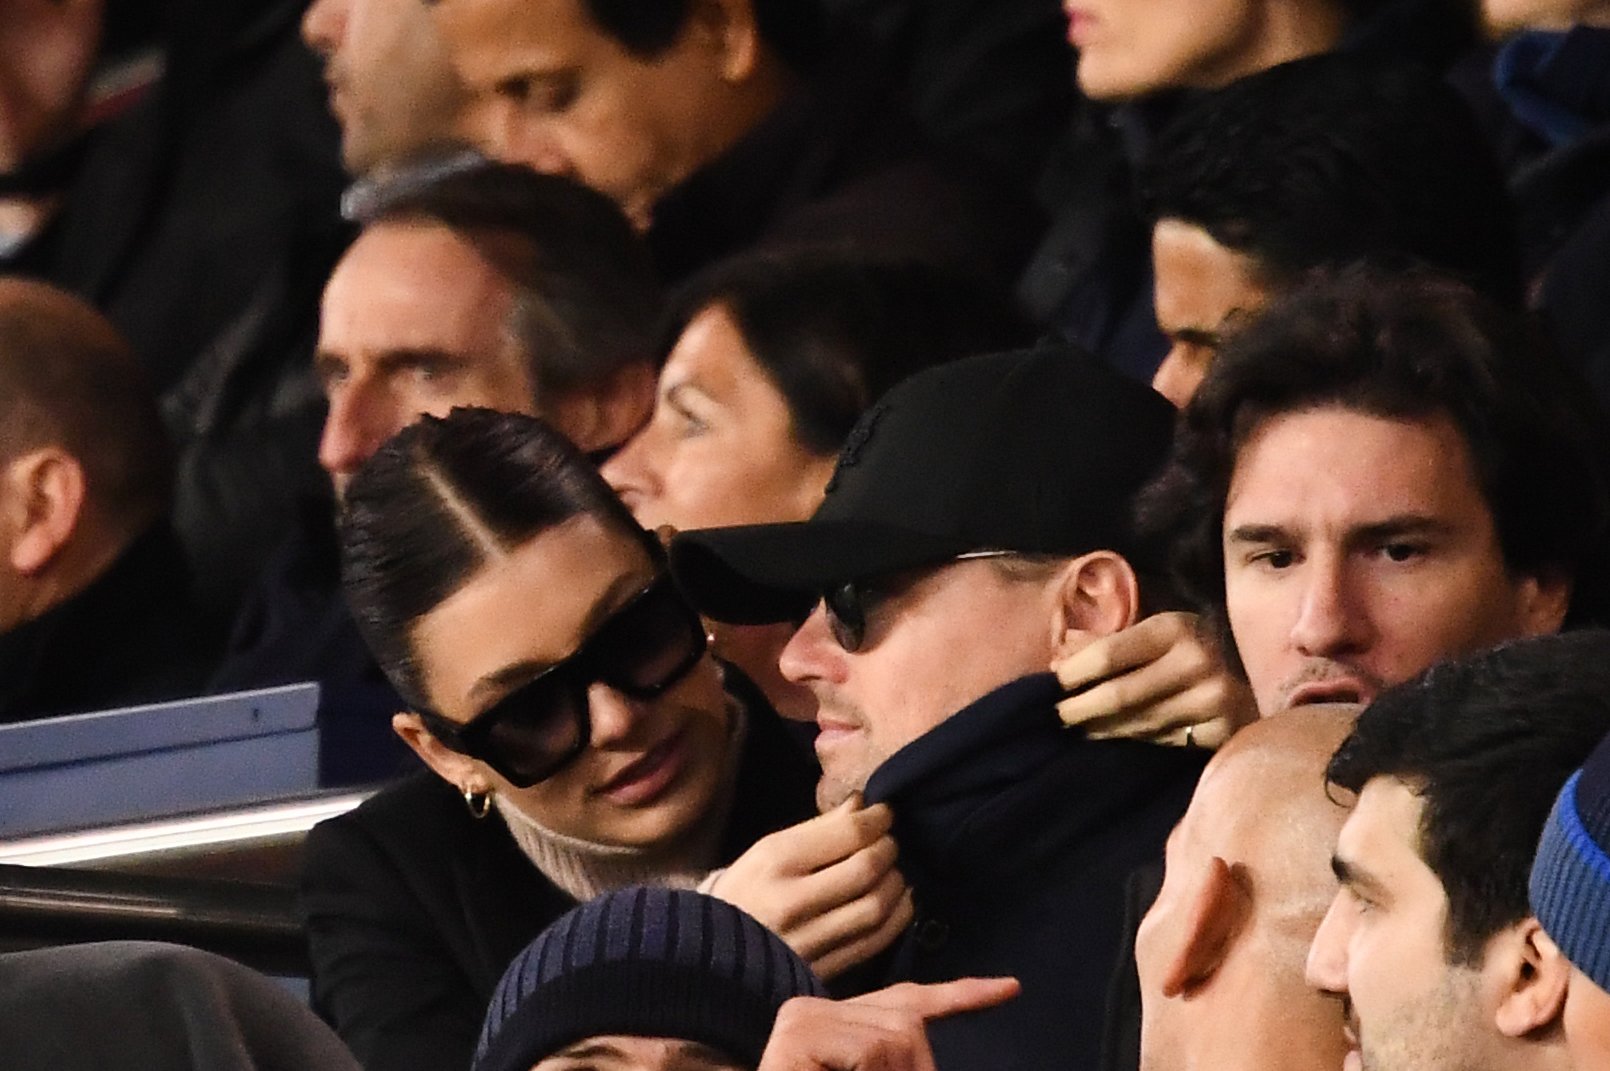 Leonardo Di Caprio and former partner, Camilla Morrone, were photographed while she adjusted his coat's collar at the UEFA Champions League Group C football match between Paris Saint-Germain (PSG) and Liverpool FC in 2018 | Source: Getty Images